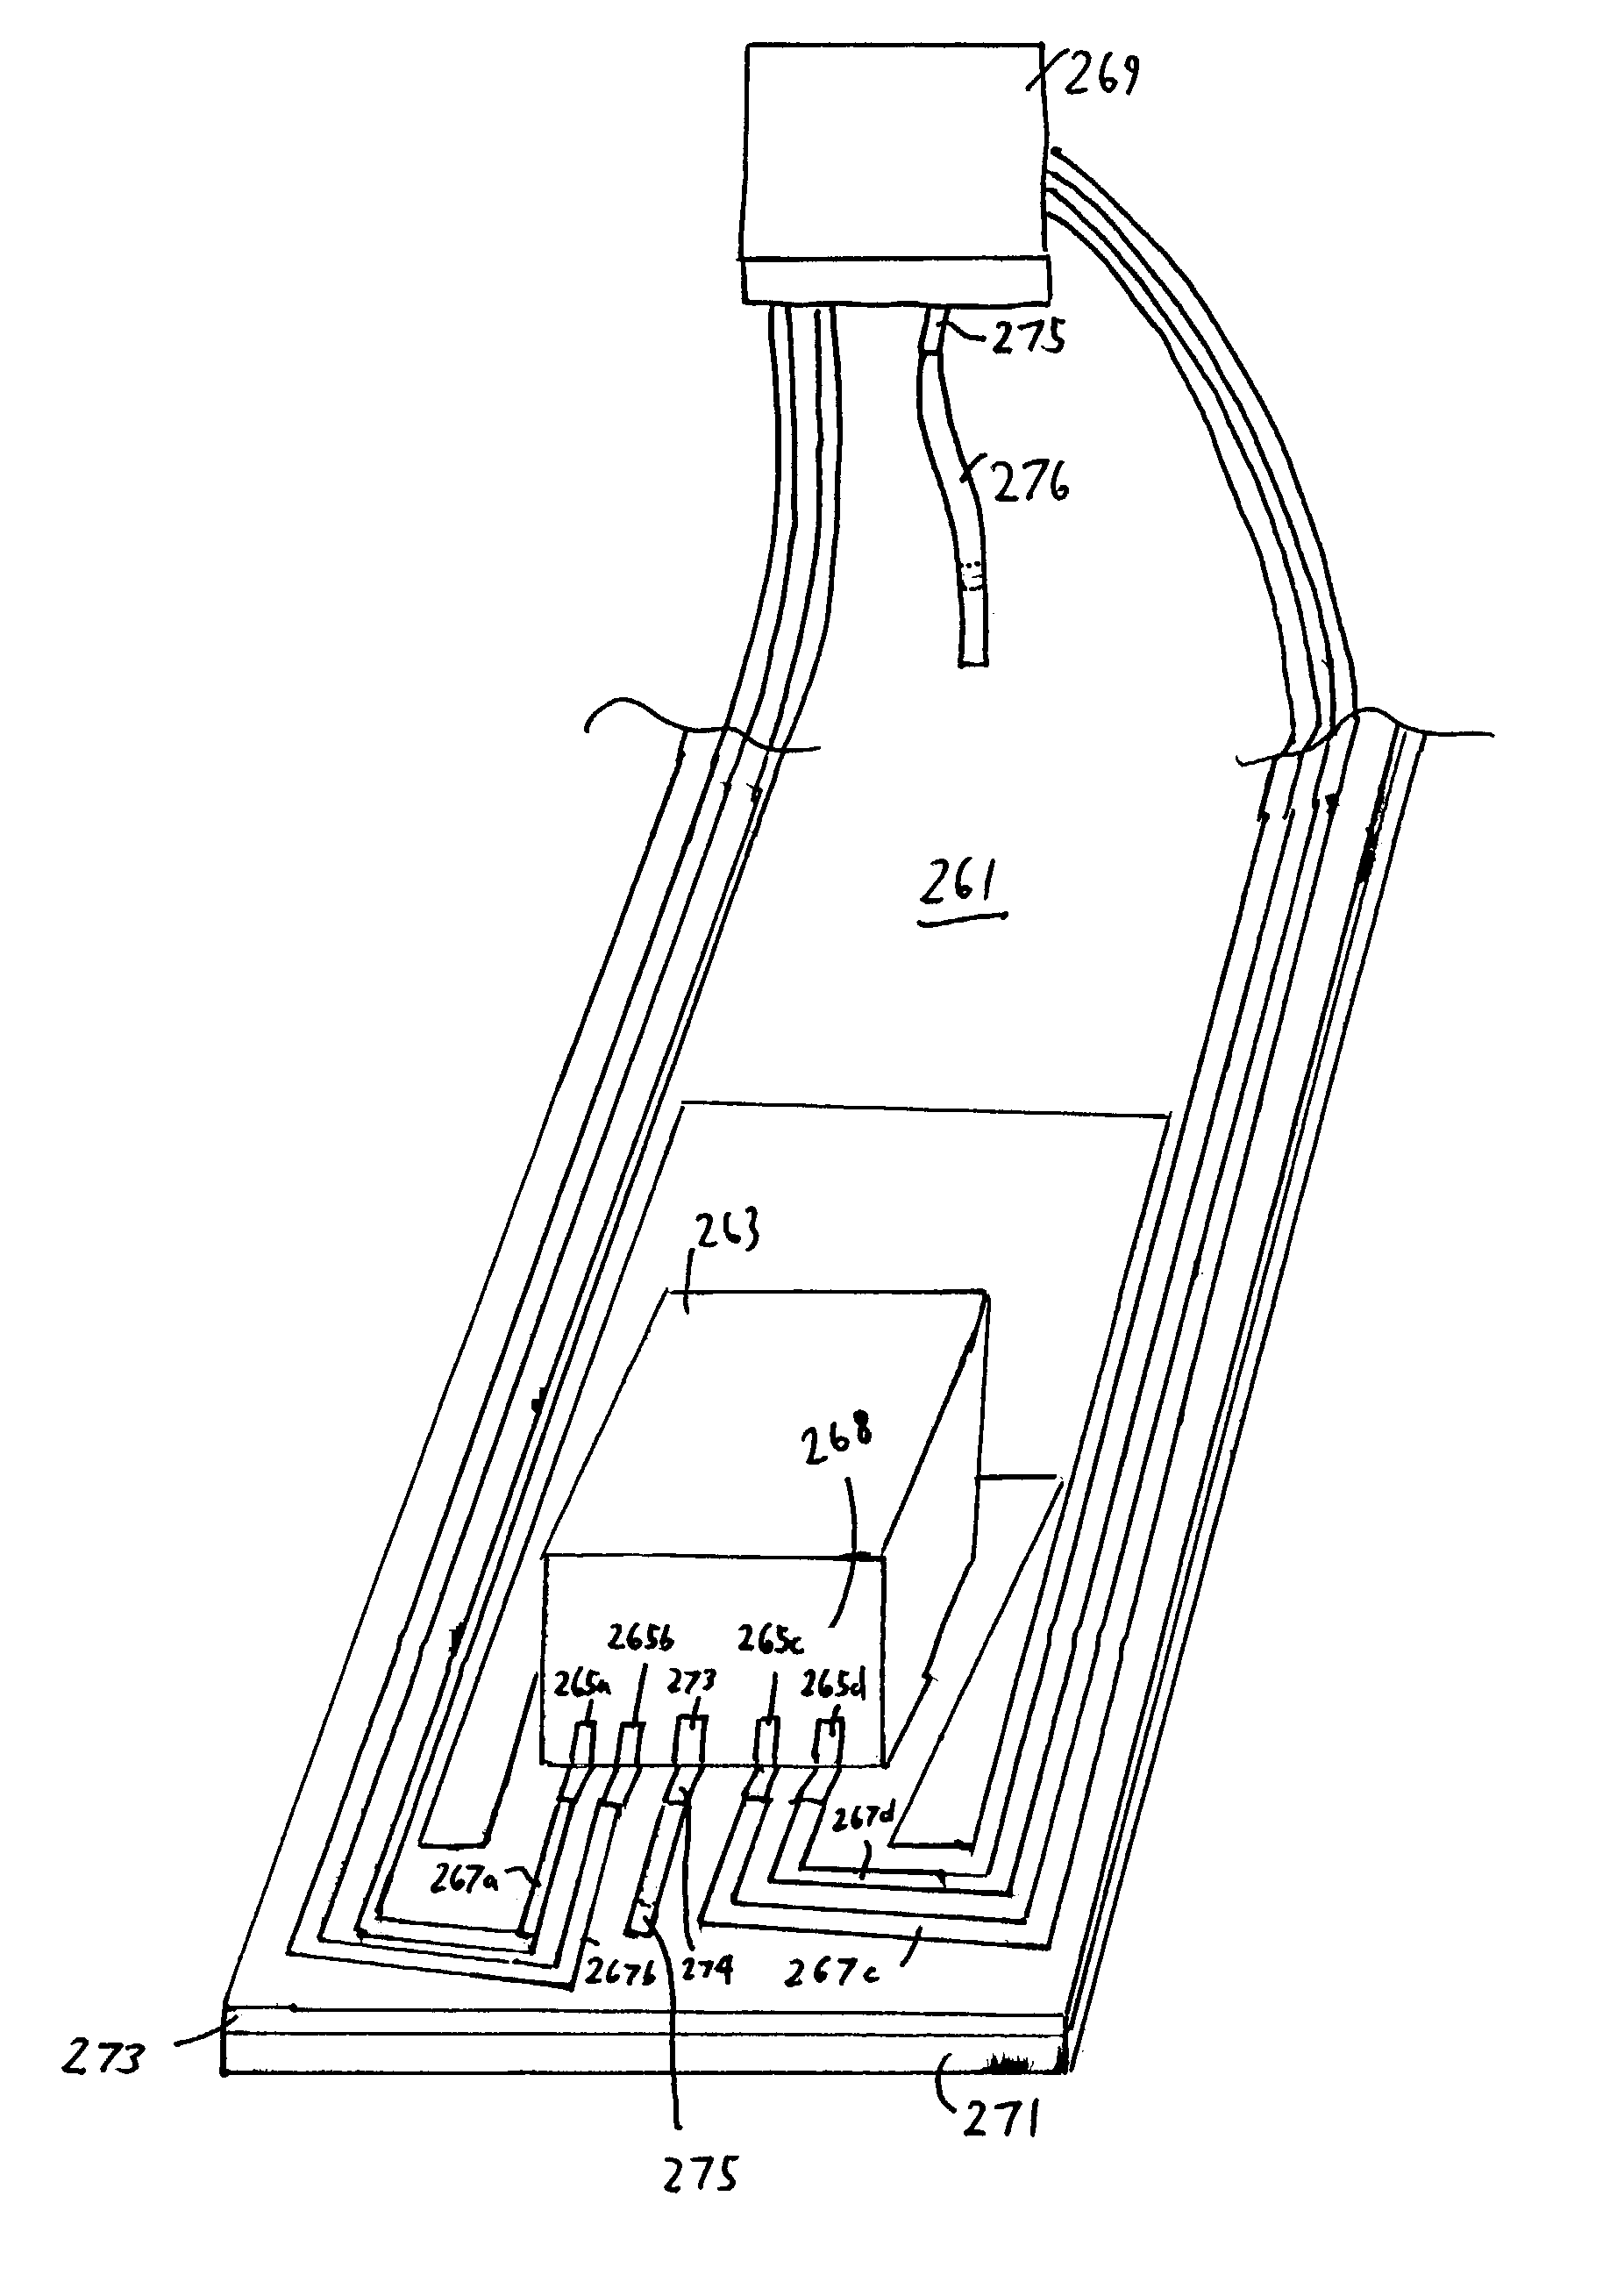 Method and apparatus for providing an additional ground pad and electrical connection for grounding a magnetic recording head